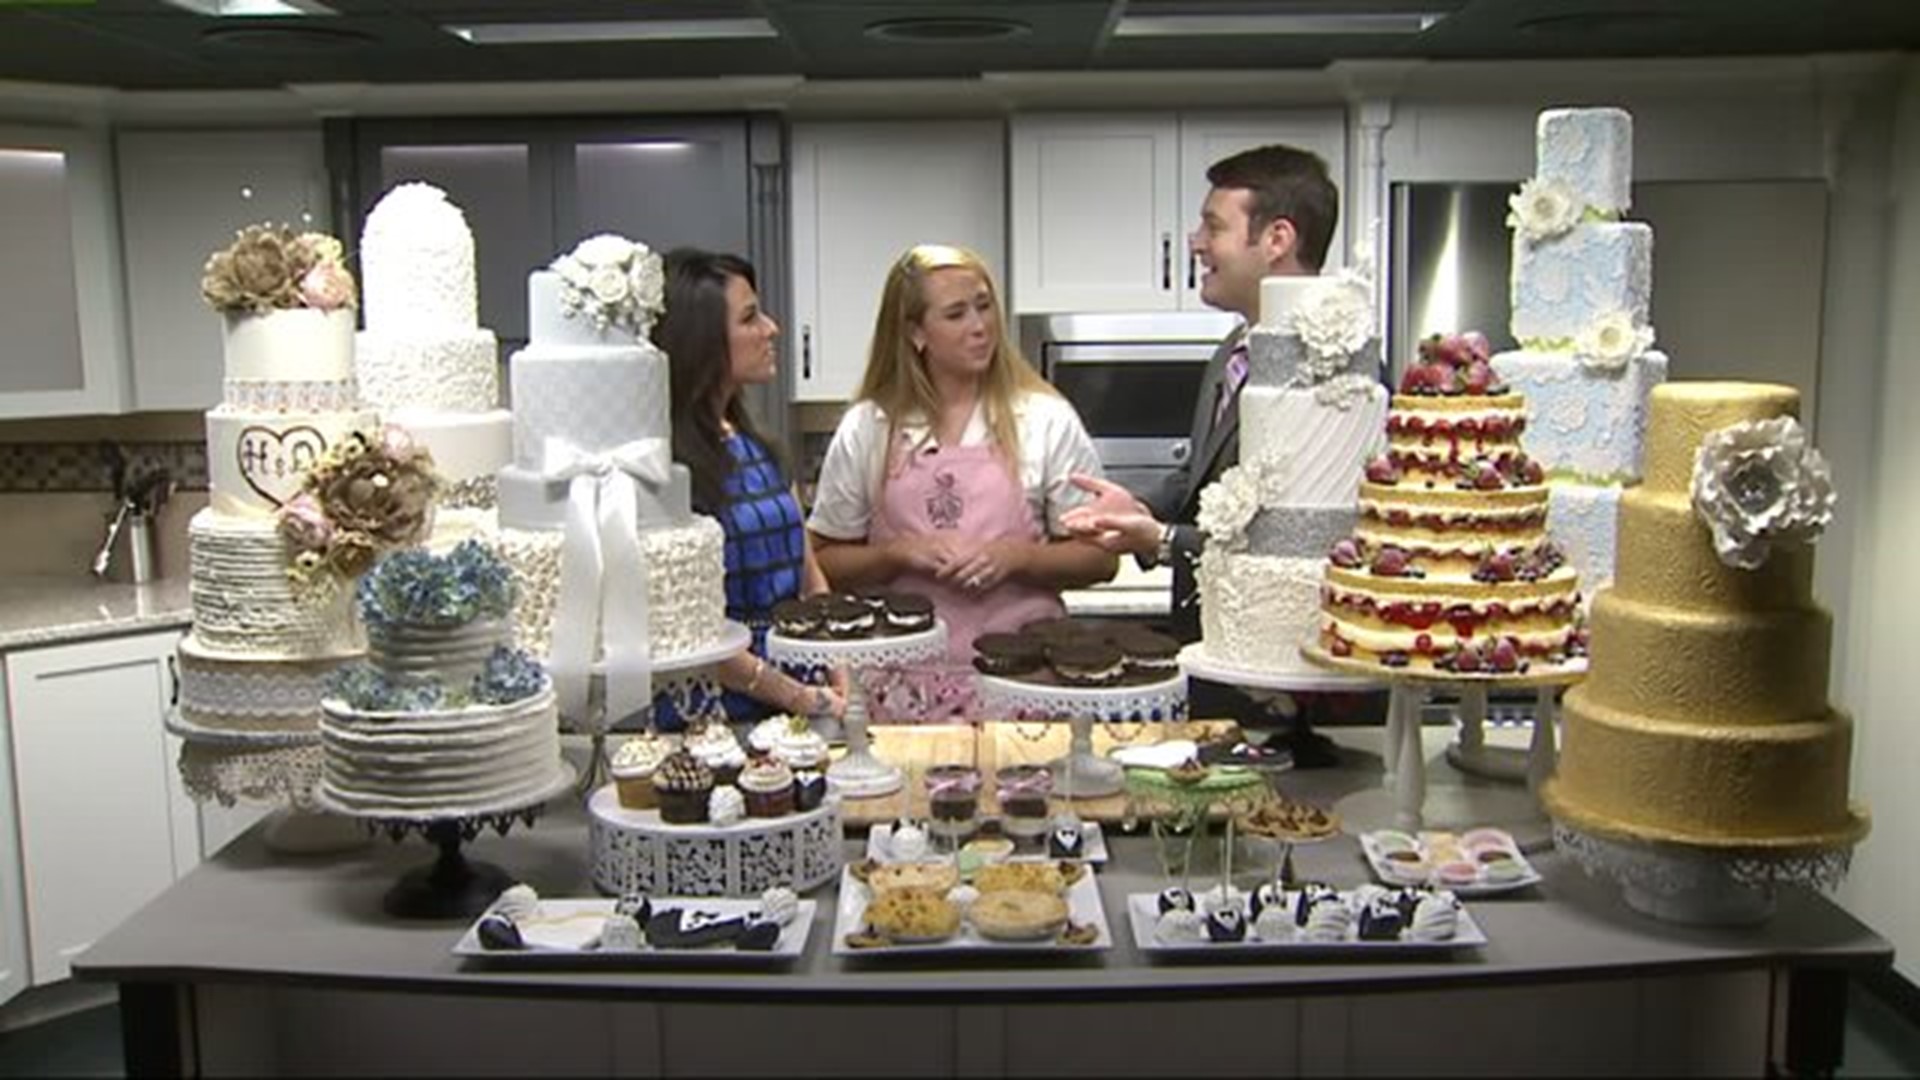 PA Bakery is here to talk wedding trends and favors this morning